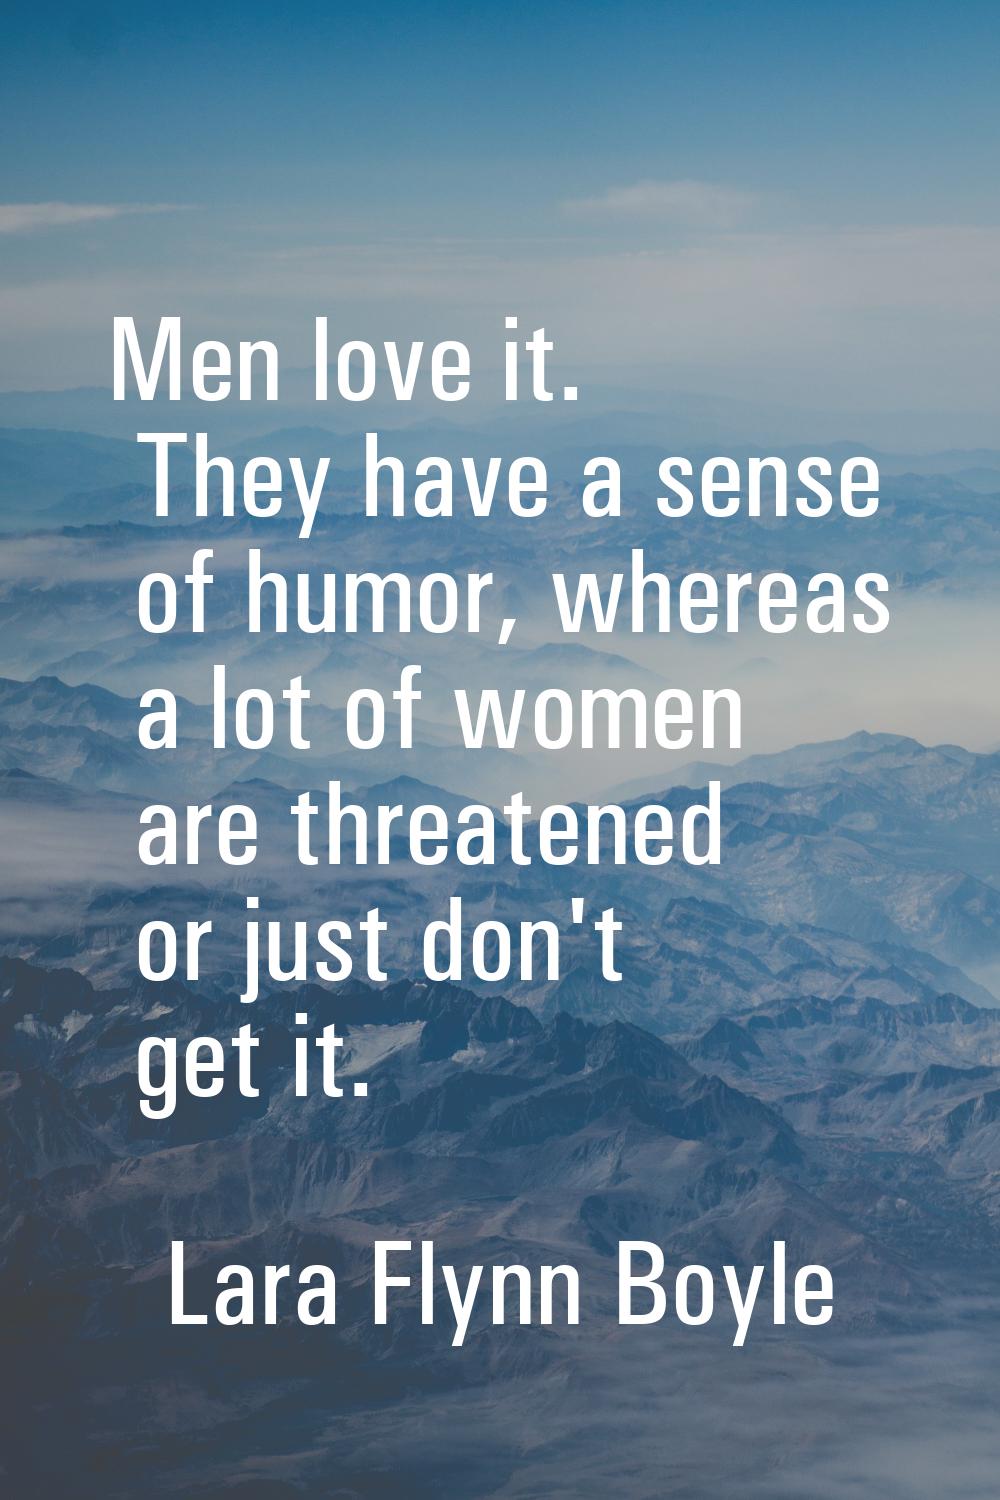 Men love it. They have a sense of humor, whereas a lot of women are threatened or just don't get it